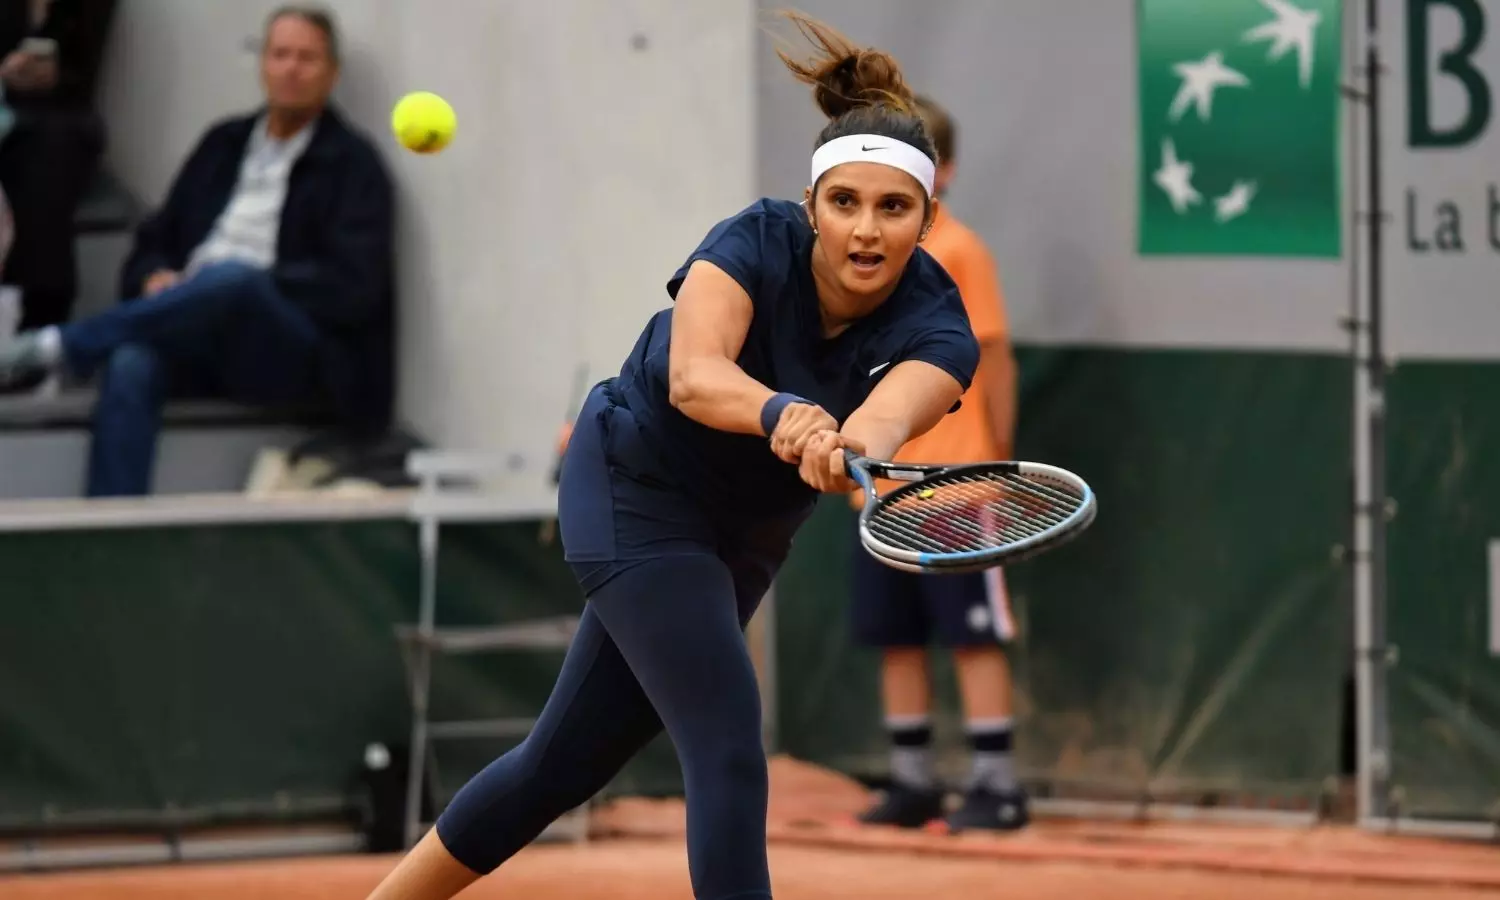 French Open 2022 LIVE: Sania Mirza-Hradecka duo eyes Quarterfinals berth in women's doubles, faces Pegula-Gauff pair - Follow Live Updates